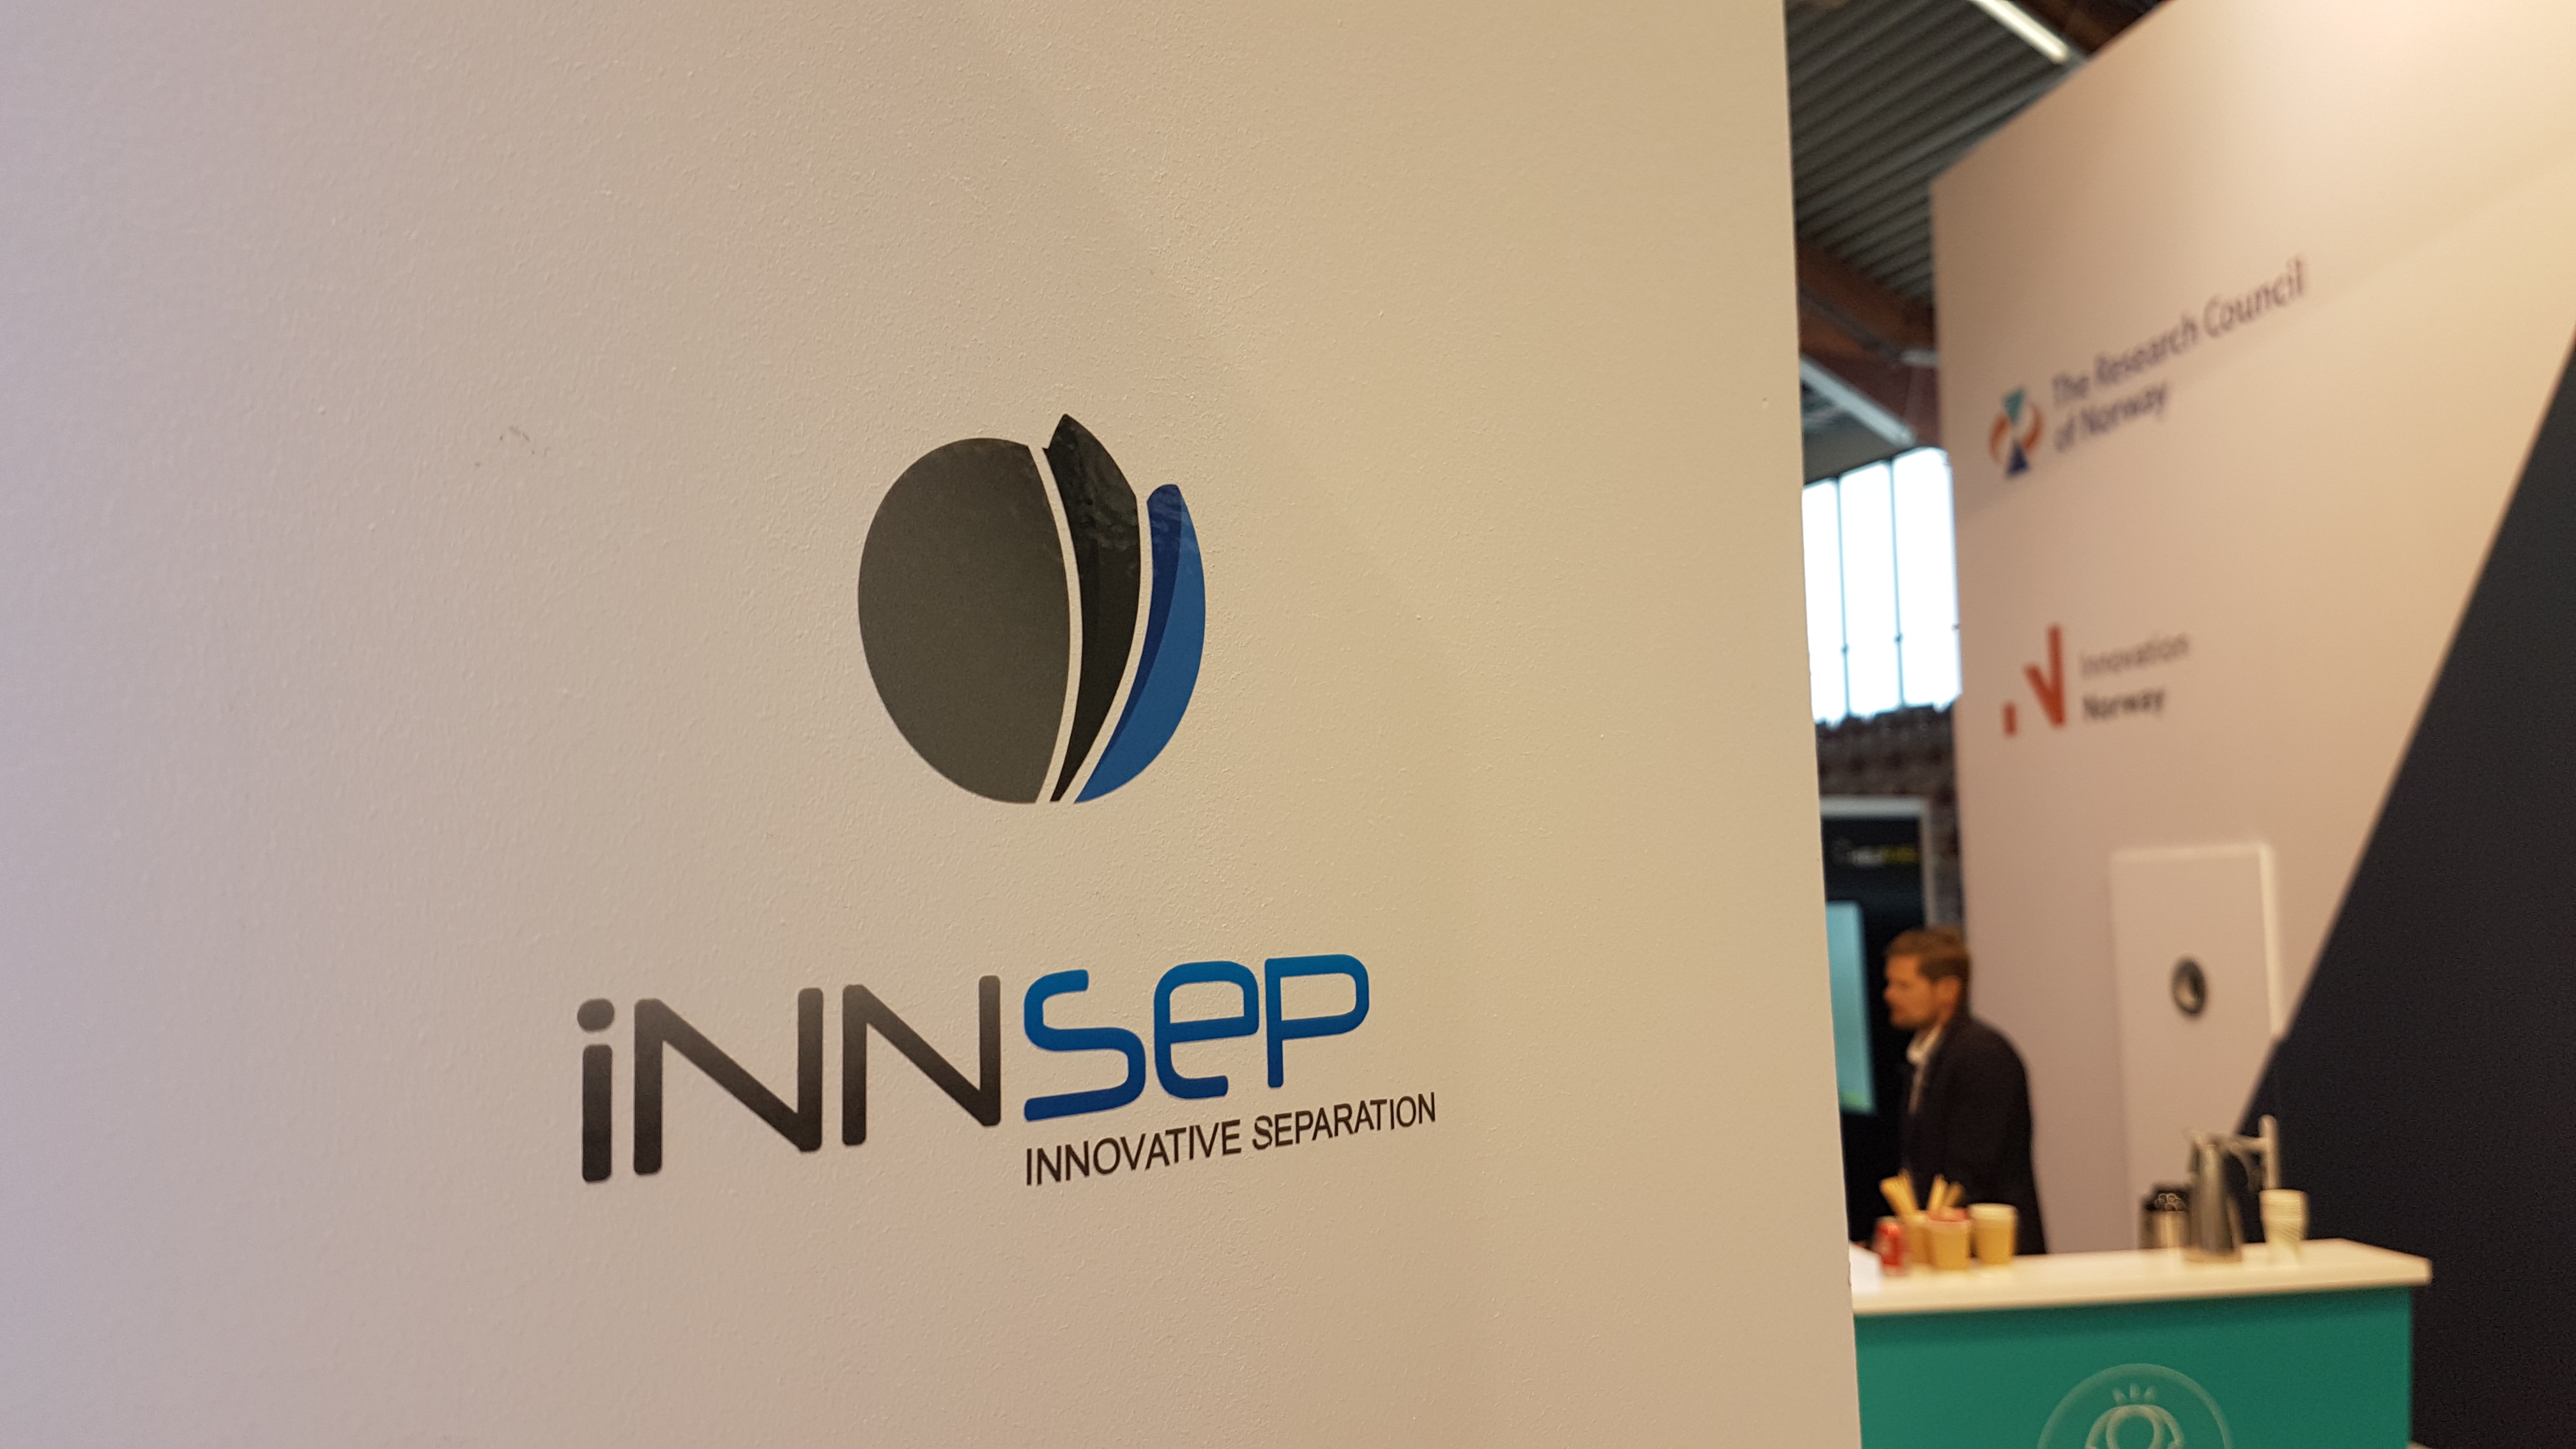 InnSep ONS stand